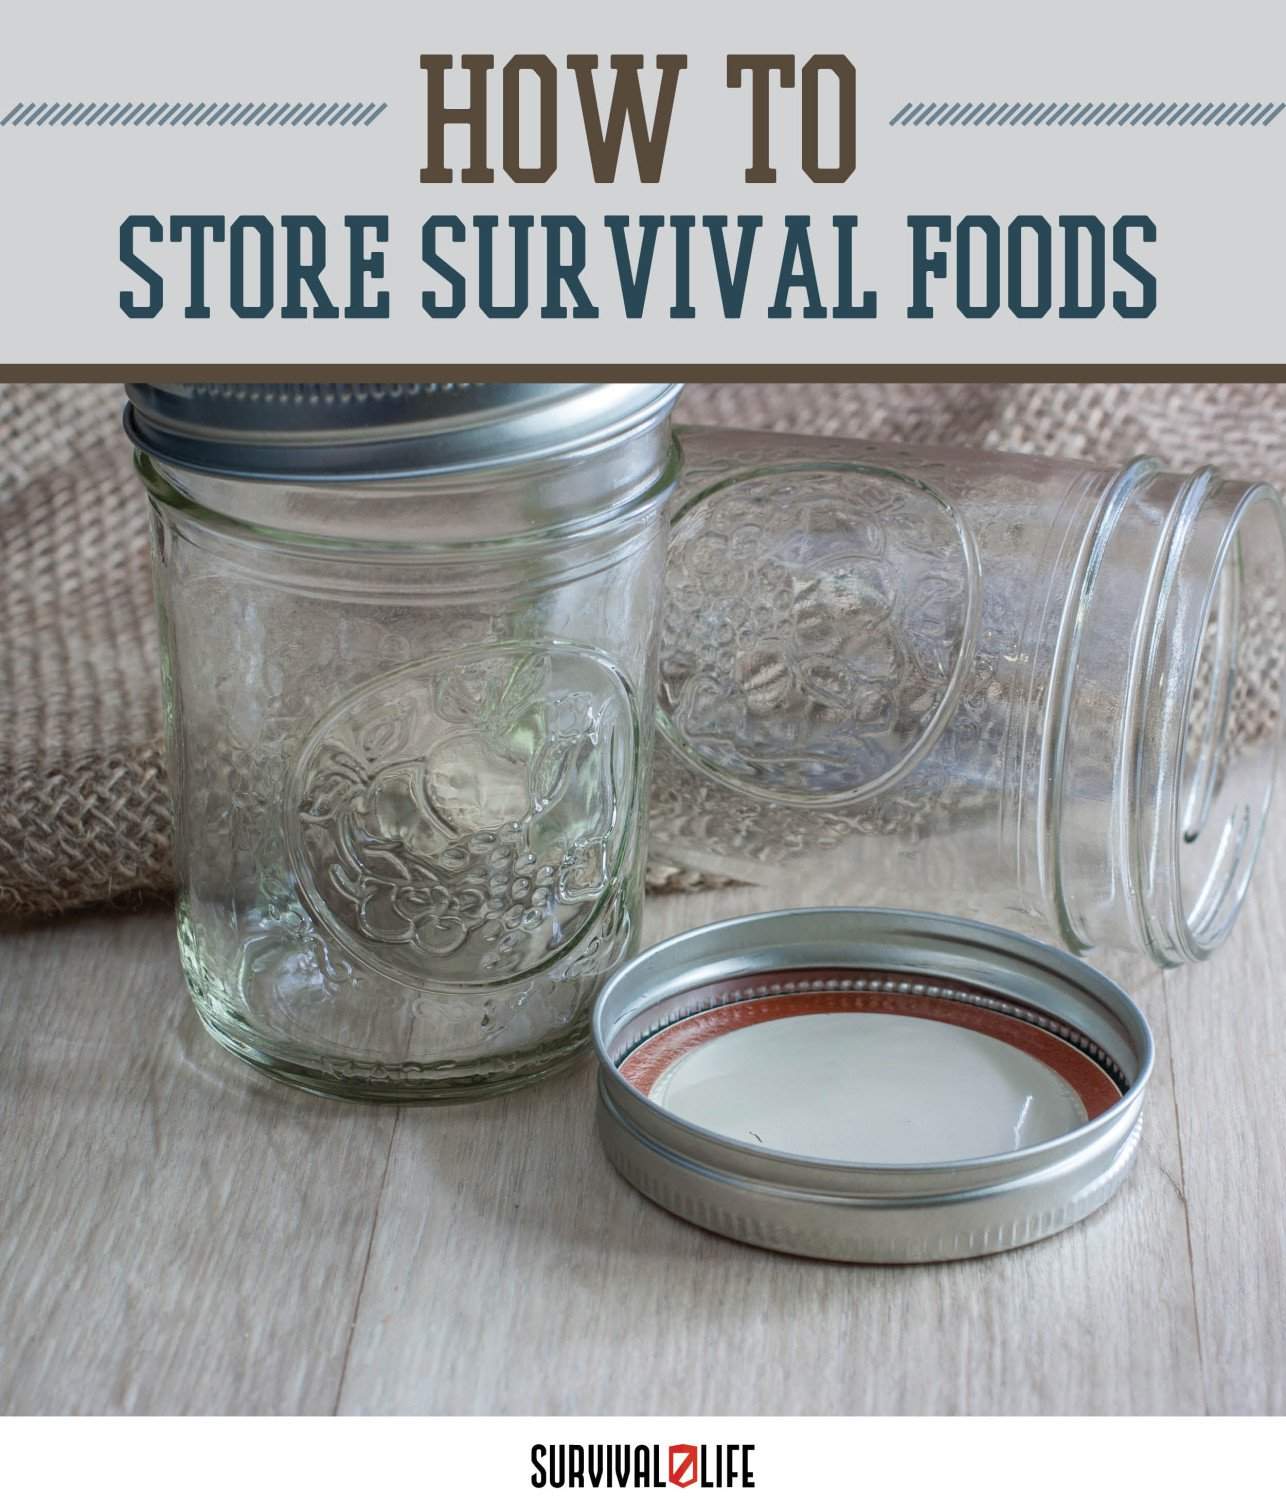 8 Survival Foods and How To Store Them by Survival Life at http://survivallife.com/2015/05/20/8-survival-foods-and-how-to-store-them